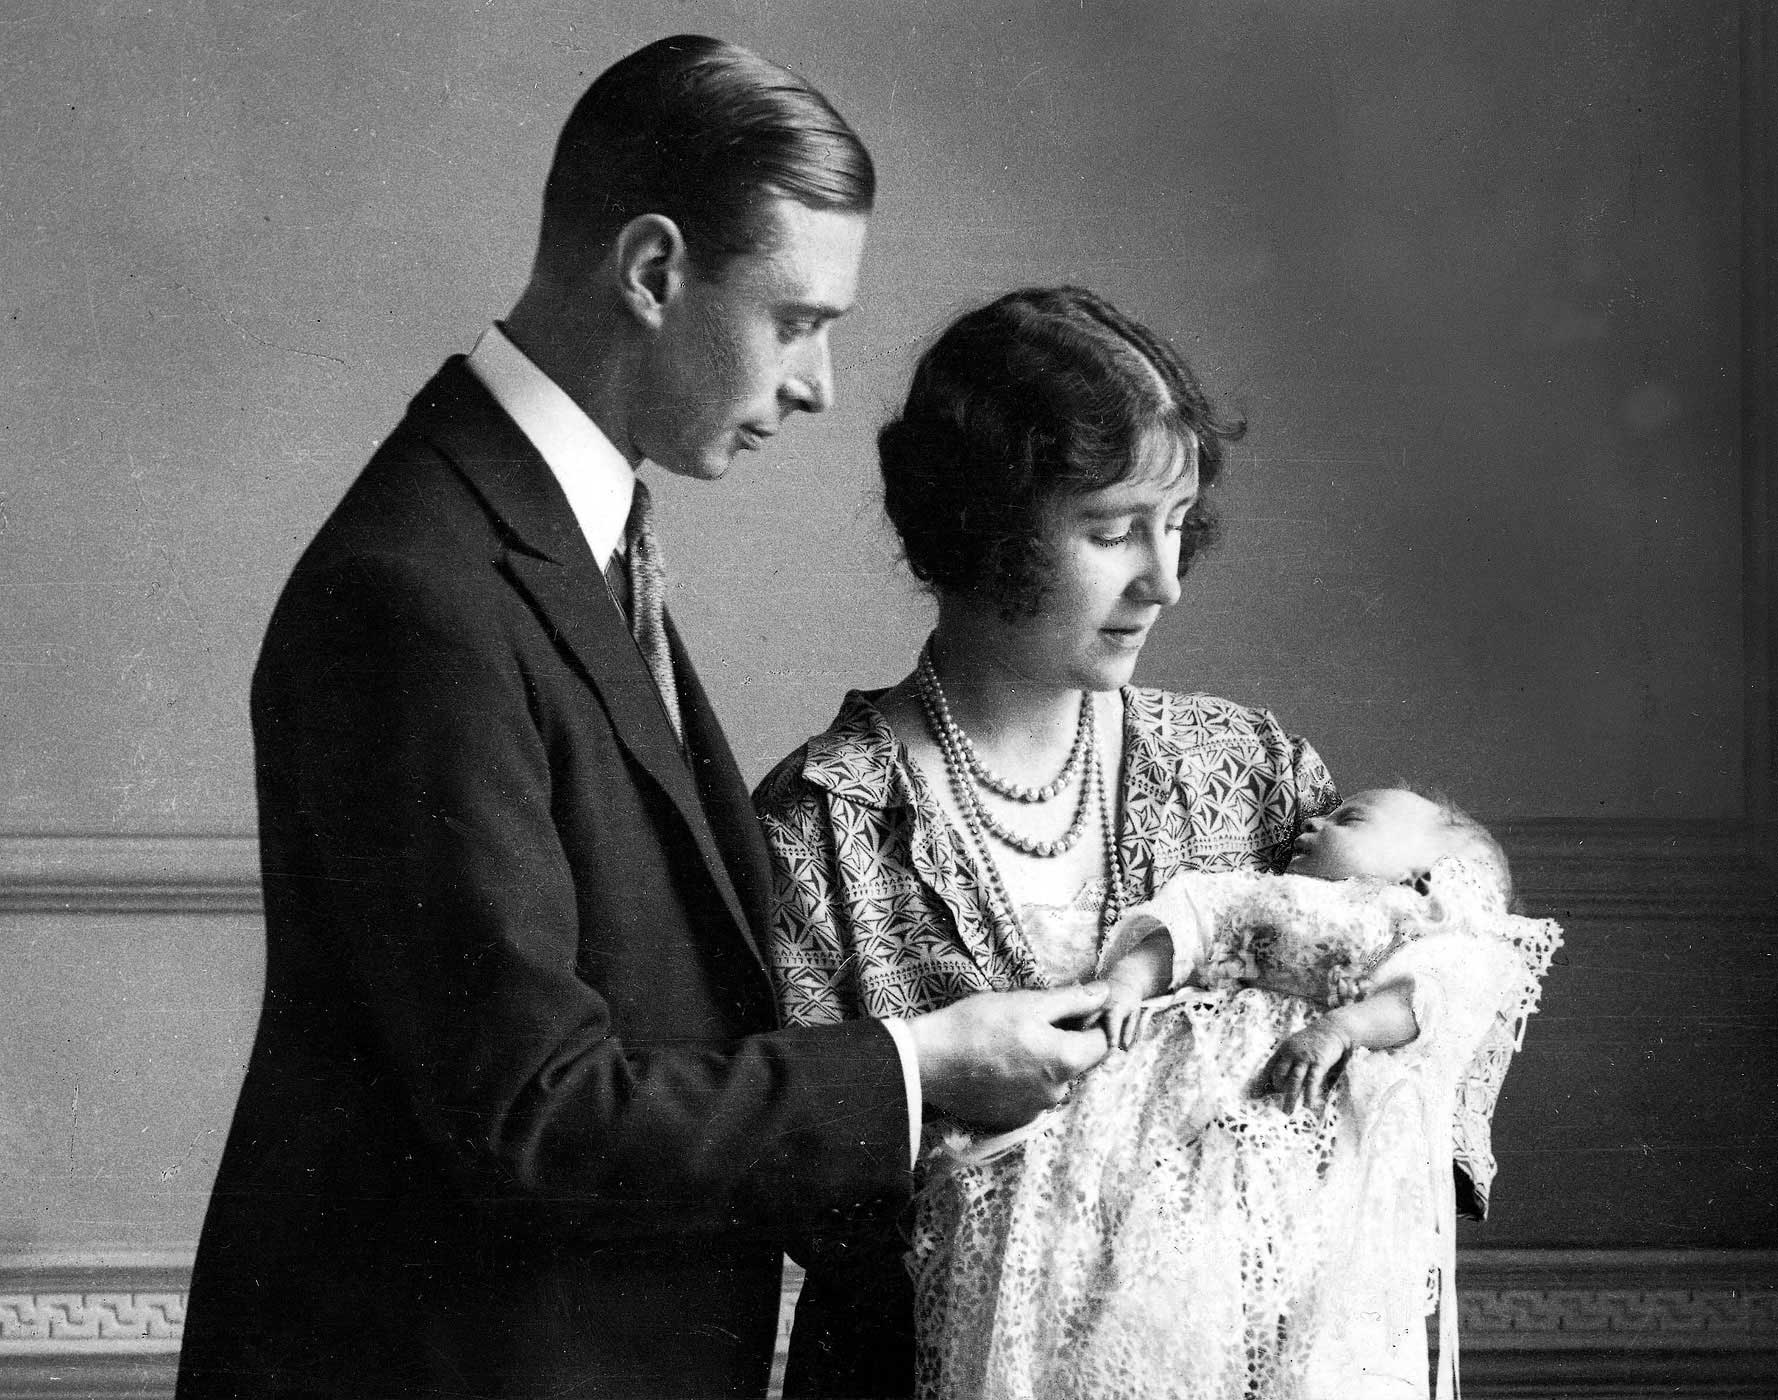 1926. The Duke and Duchess of York (later King George VI and Queen Elizabeth, the Queen Mother) pictured with their daughter (later, Queen Elizabeth II) as she sleeps in a precious christening robe, which has been used in the Royal Family for generations.